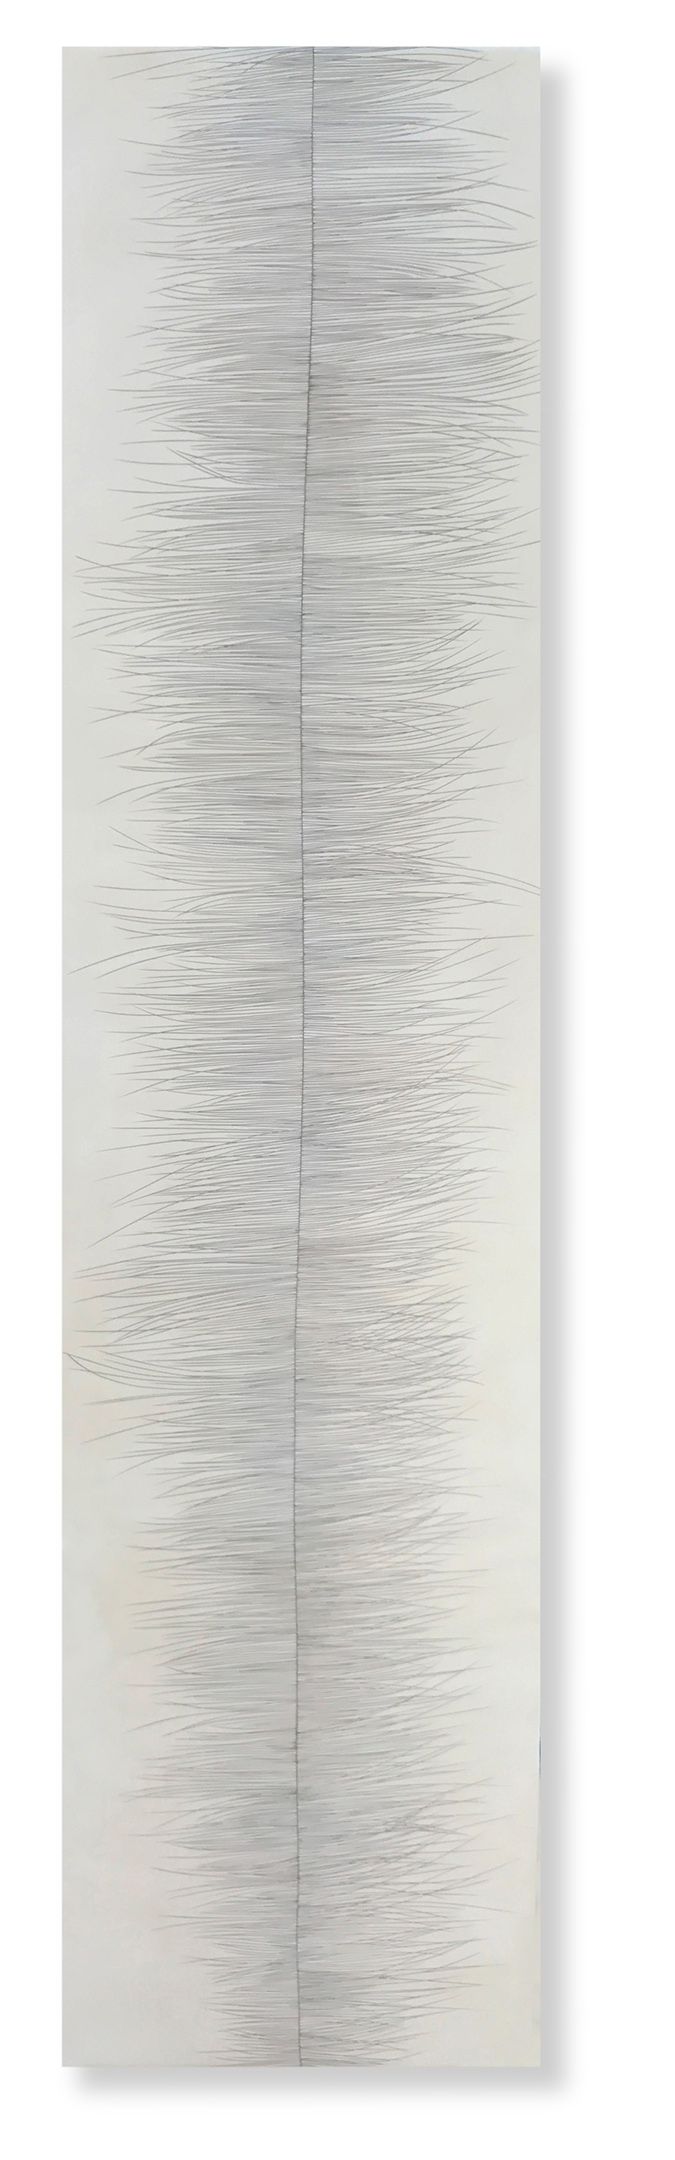  Threadline 3, 2017 (sold) Encaustic, Oil 48 x 12 x 1.75 inches&nbsp;  The Threadline Series is inspired by visual observations made in my studio environment, in nature and on neighborhood walks: left-over loops of thread; a crisp white line in a dar